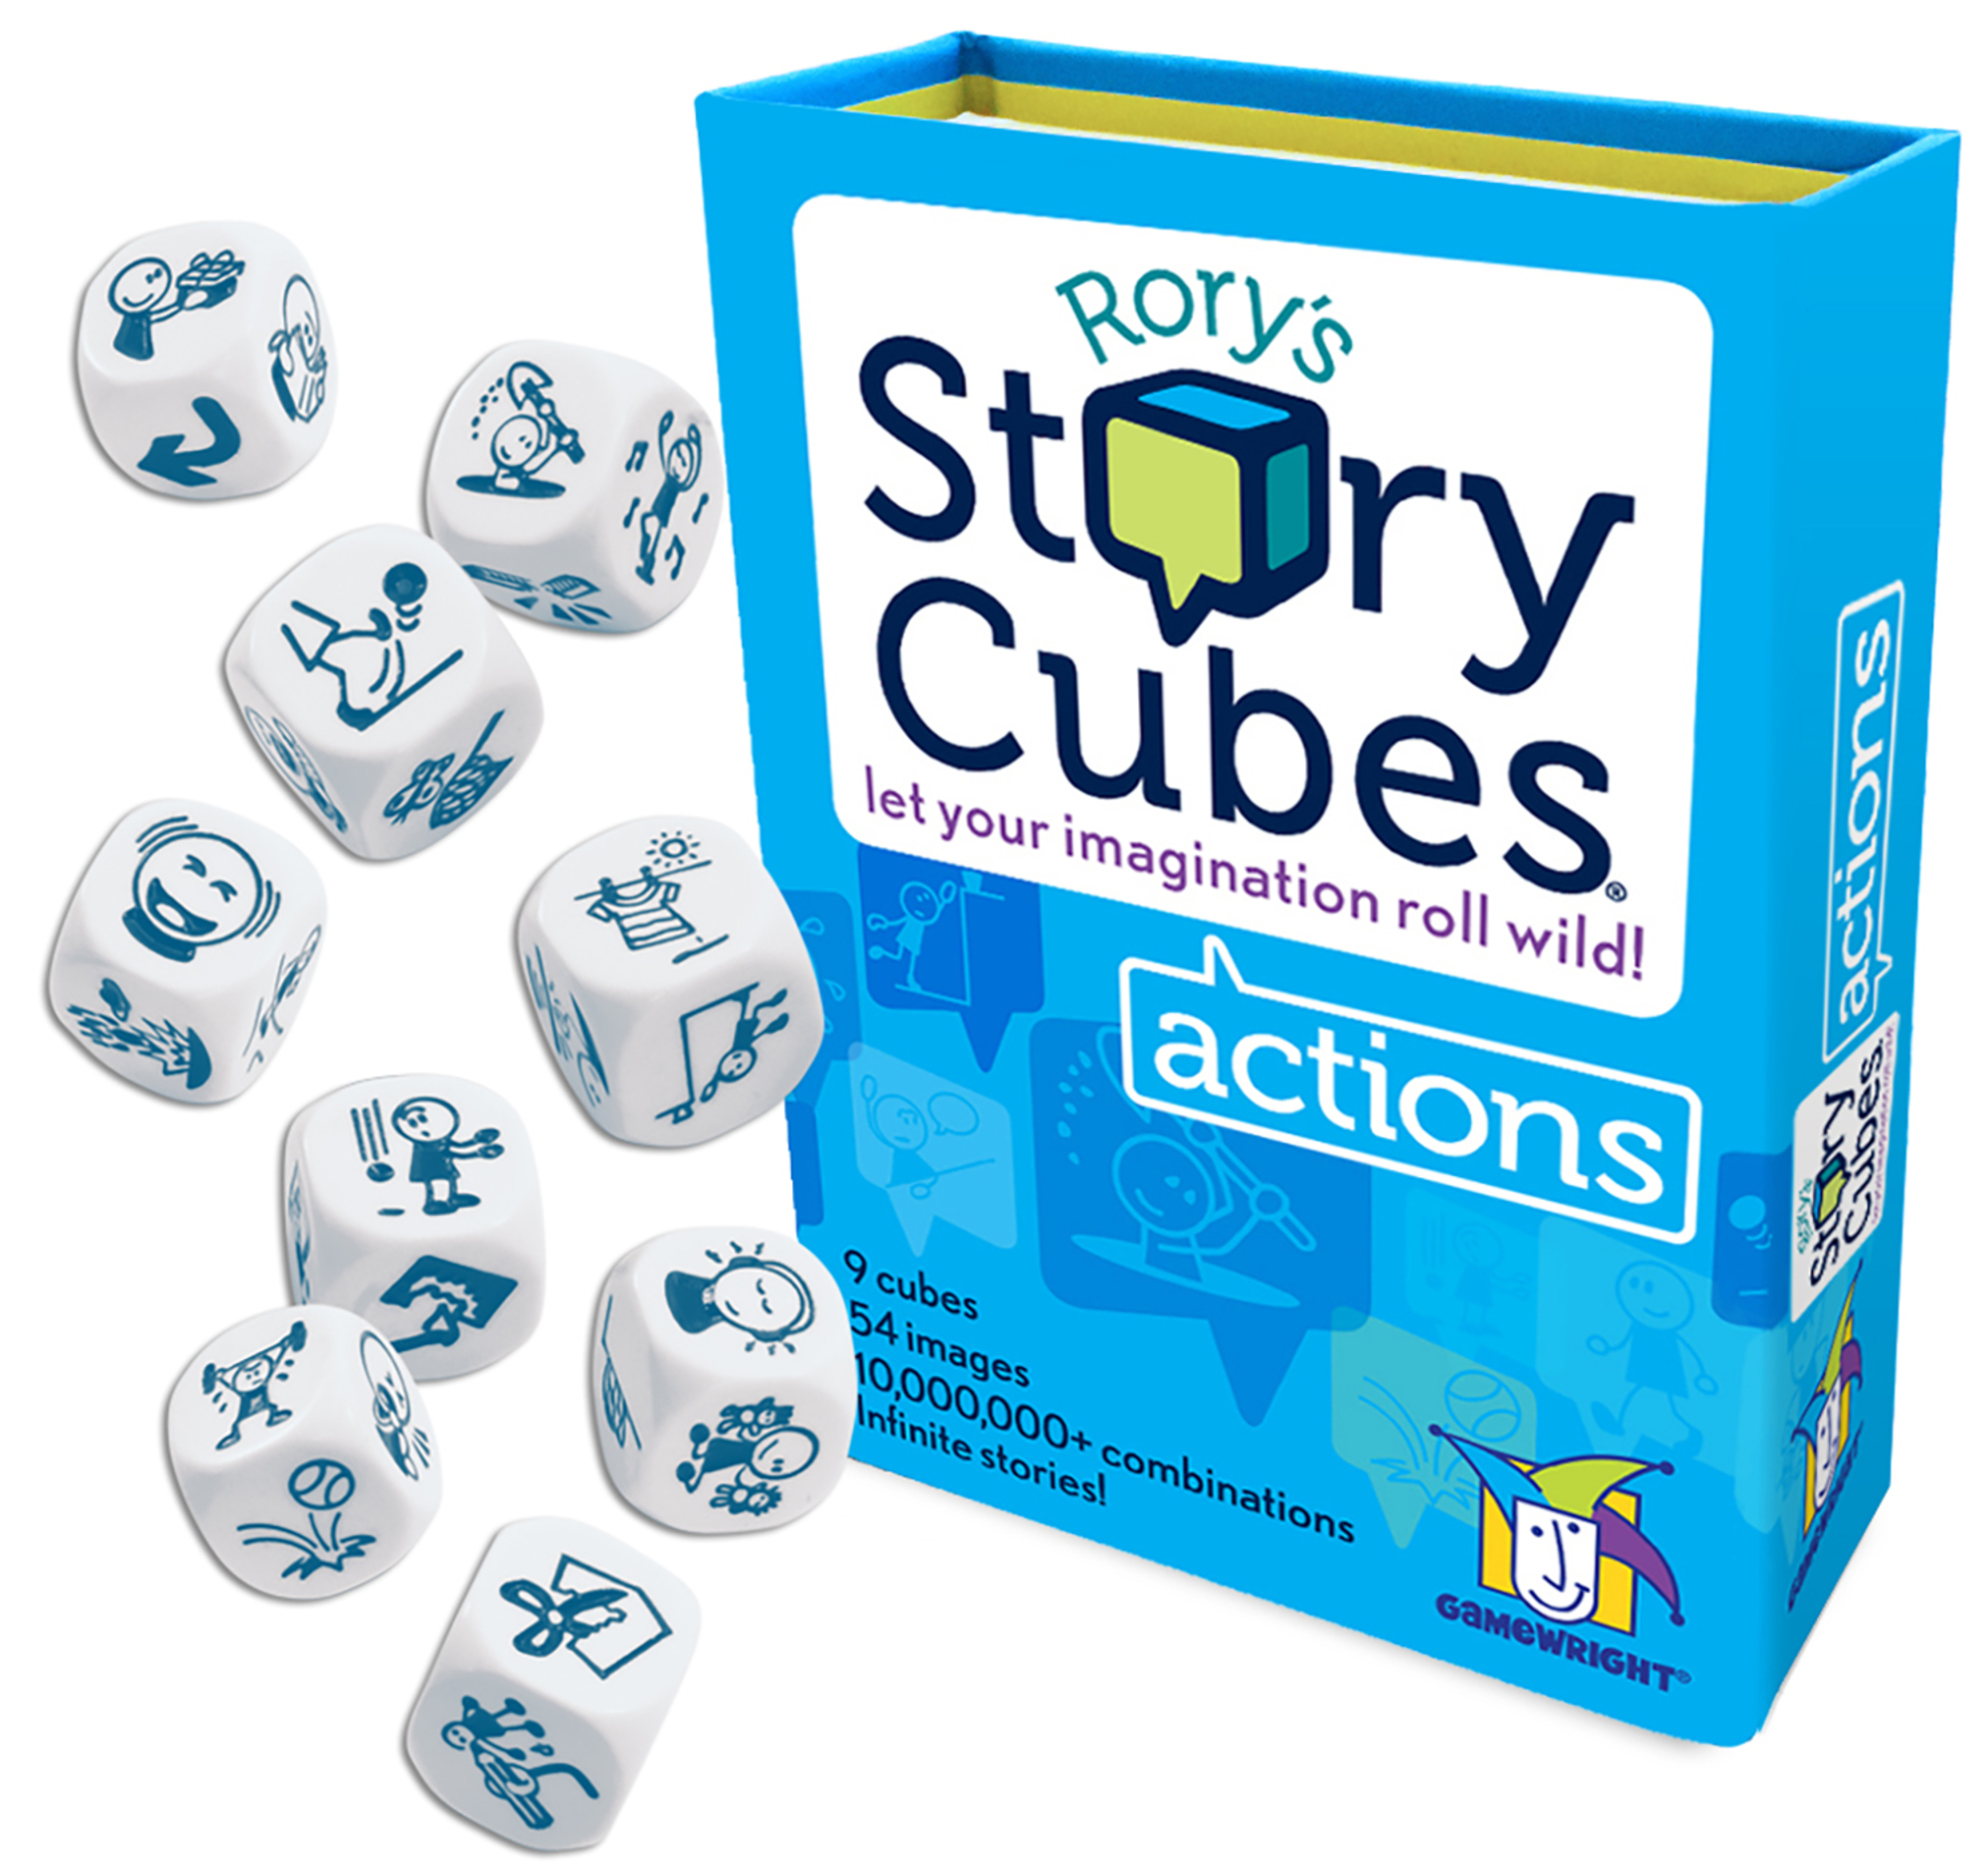 Rory's Story Cubes Arcade